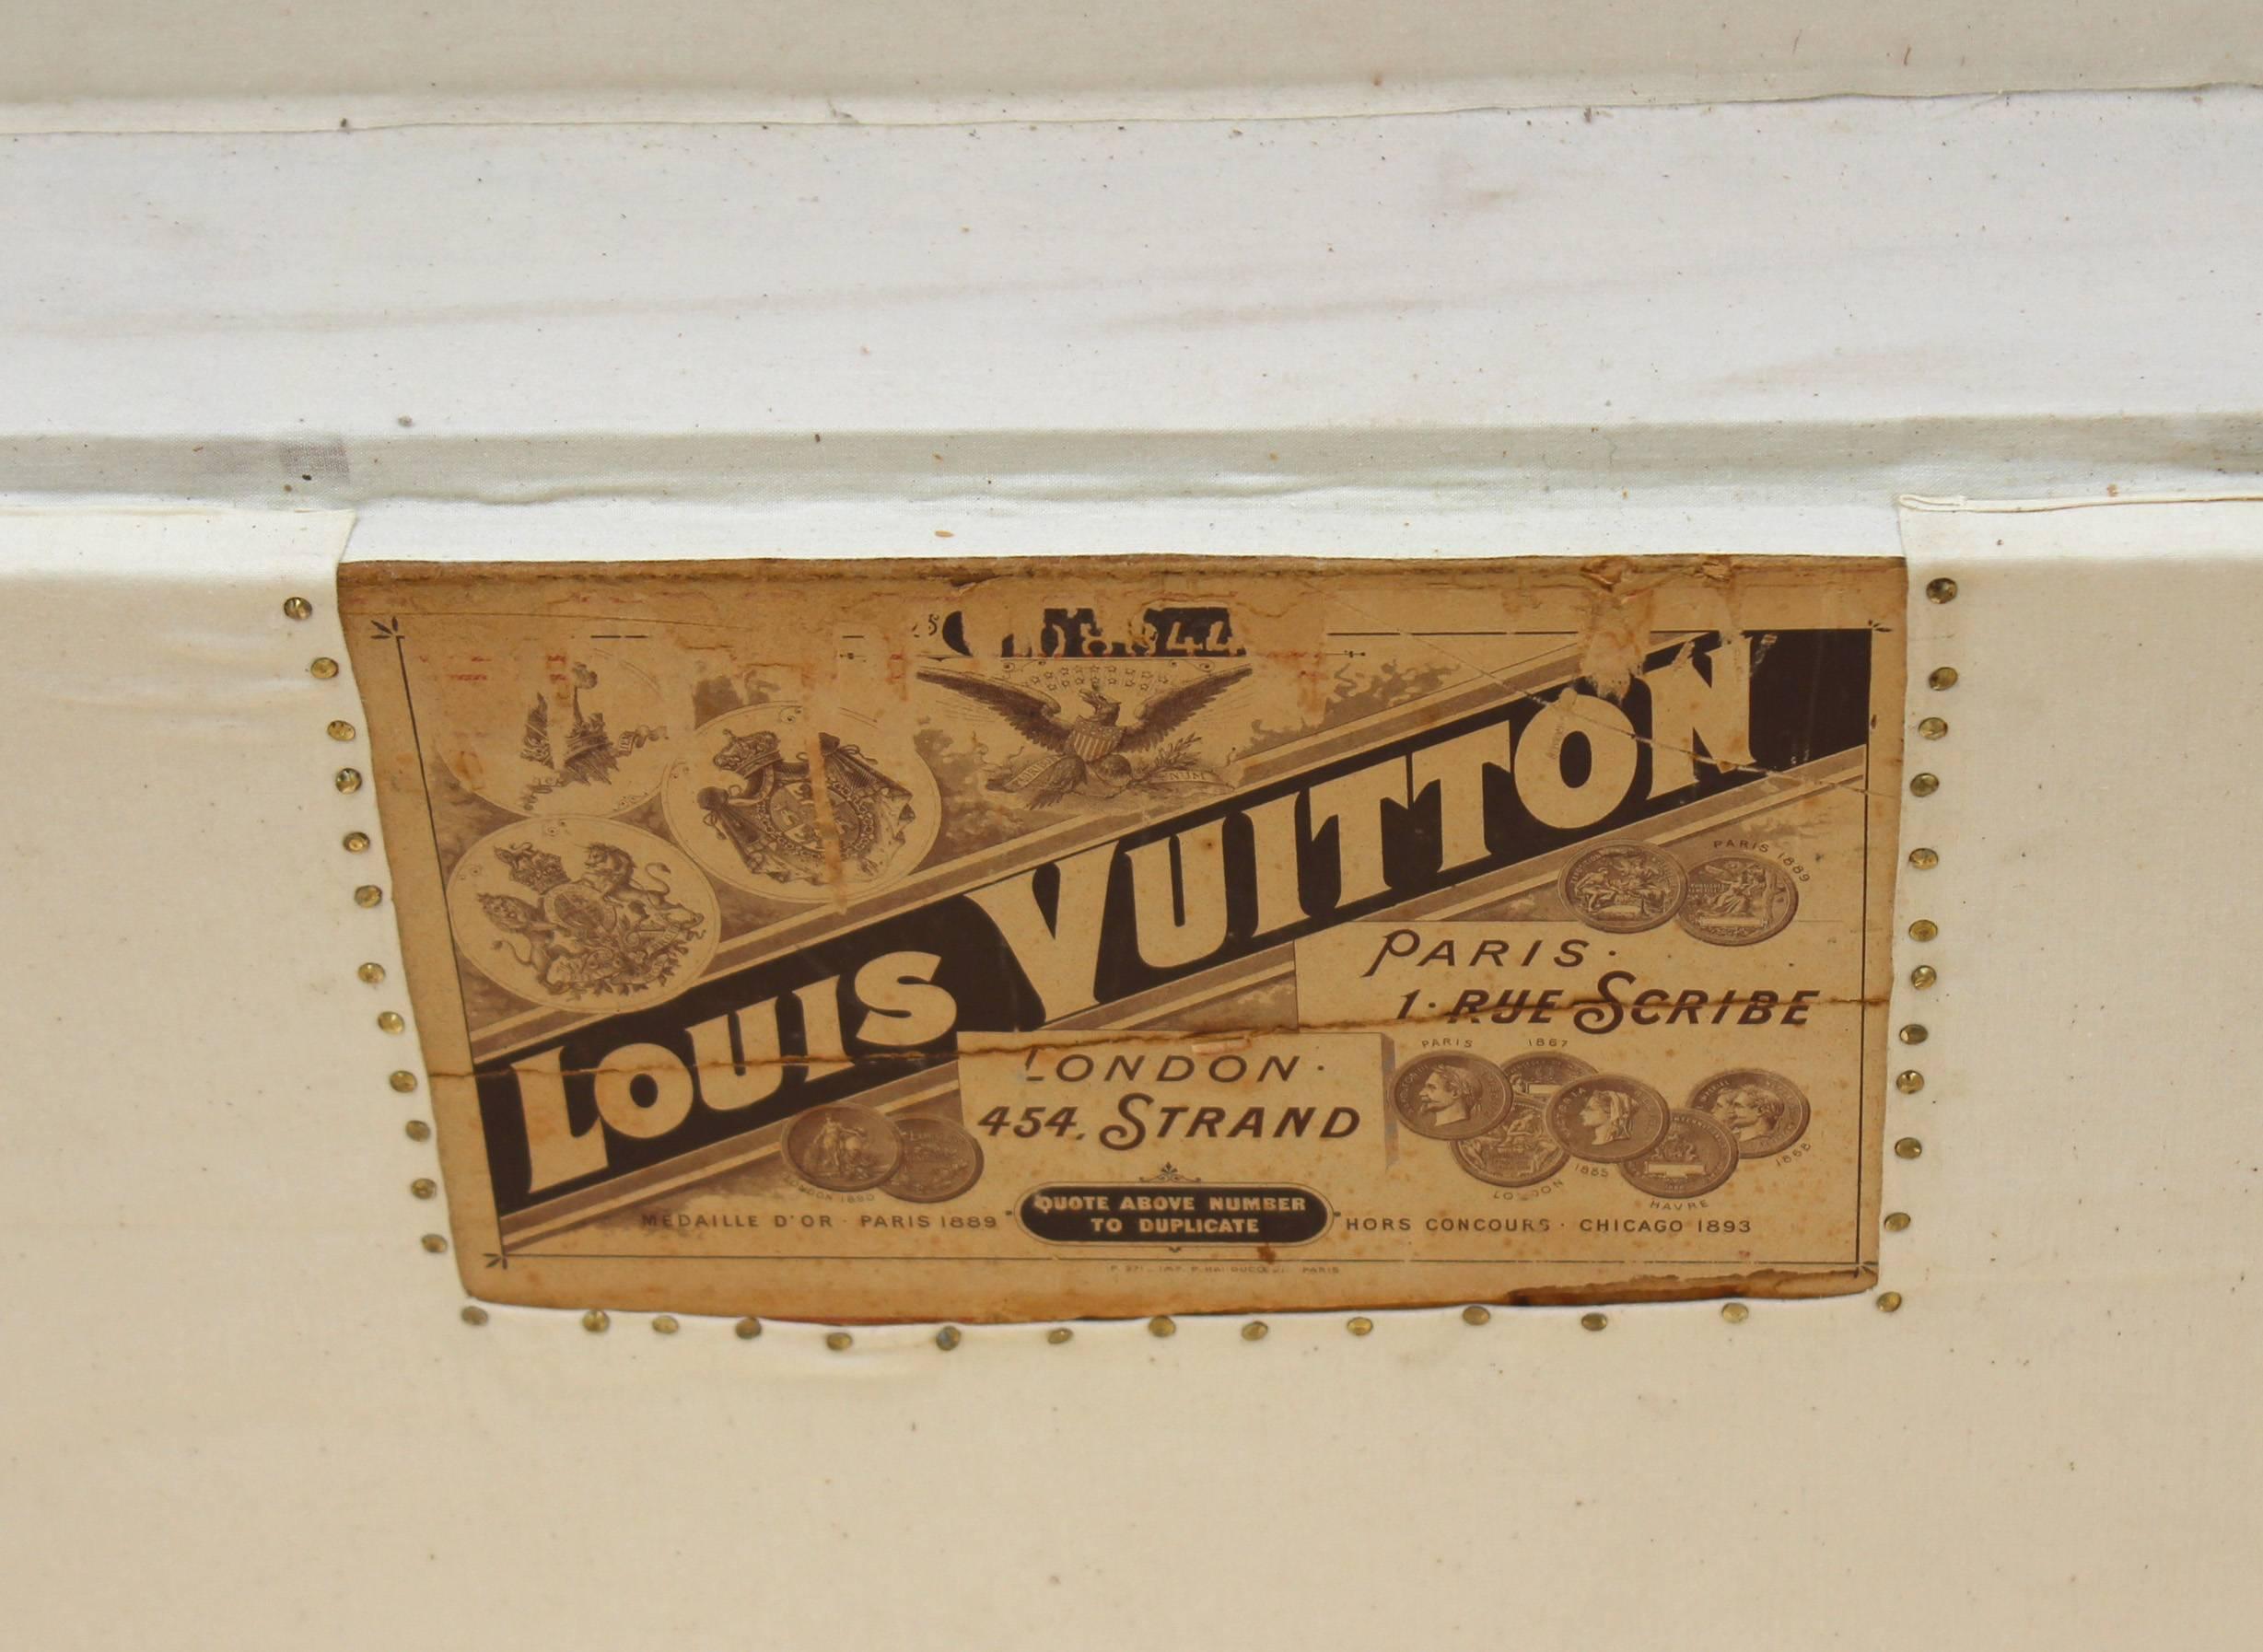 Beautiful antique Louis Vuitton courier trunk, circa 1880s -1890s.

Refurbished interior lining.